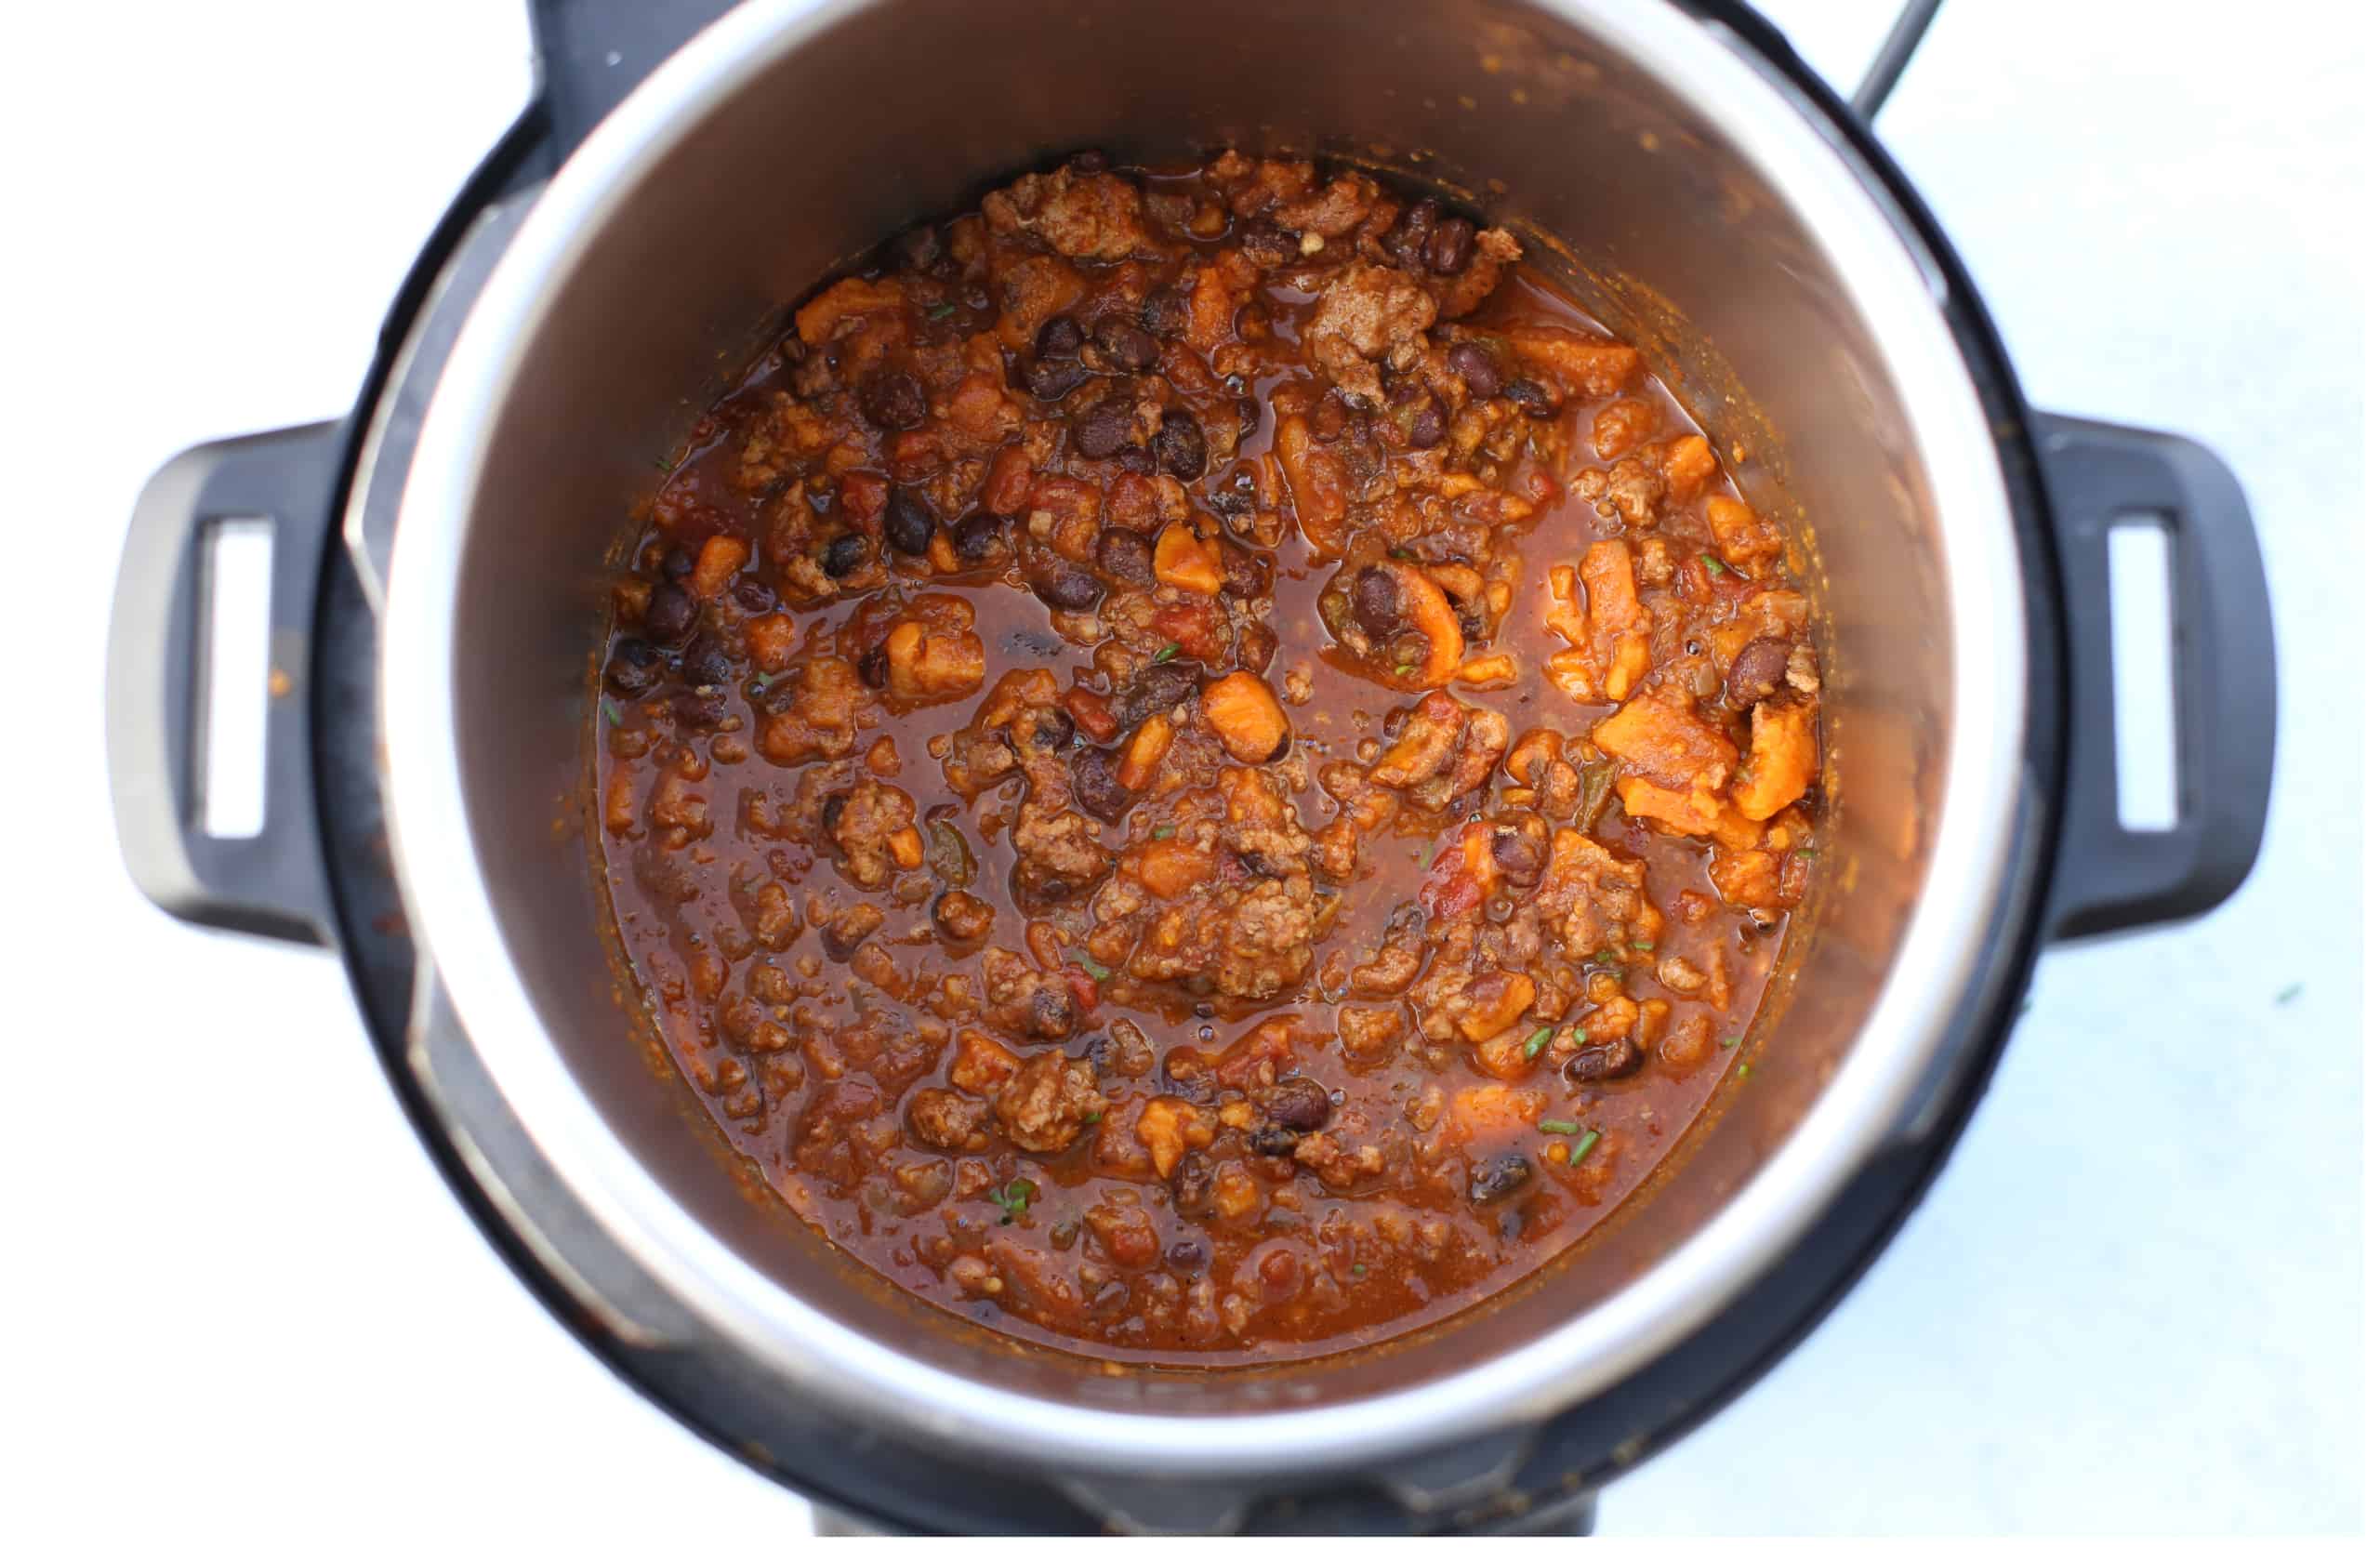 Turkey chili cooked in the Instant Pot and waiting to be served.